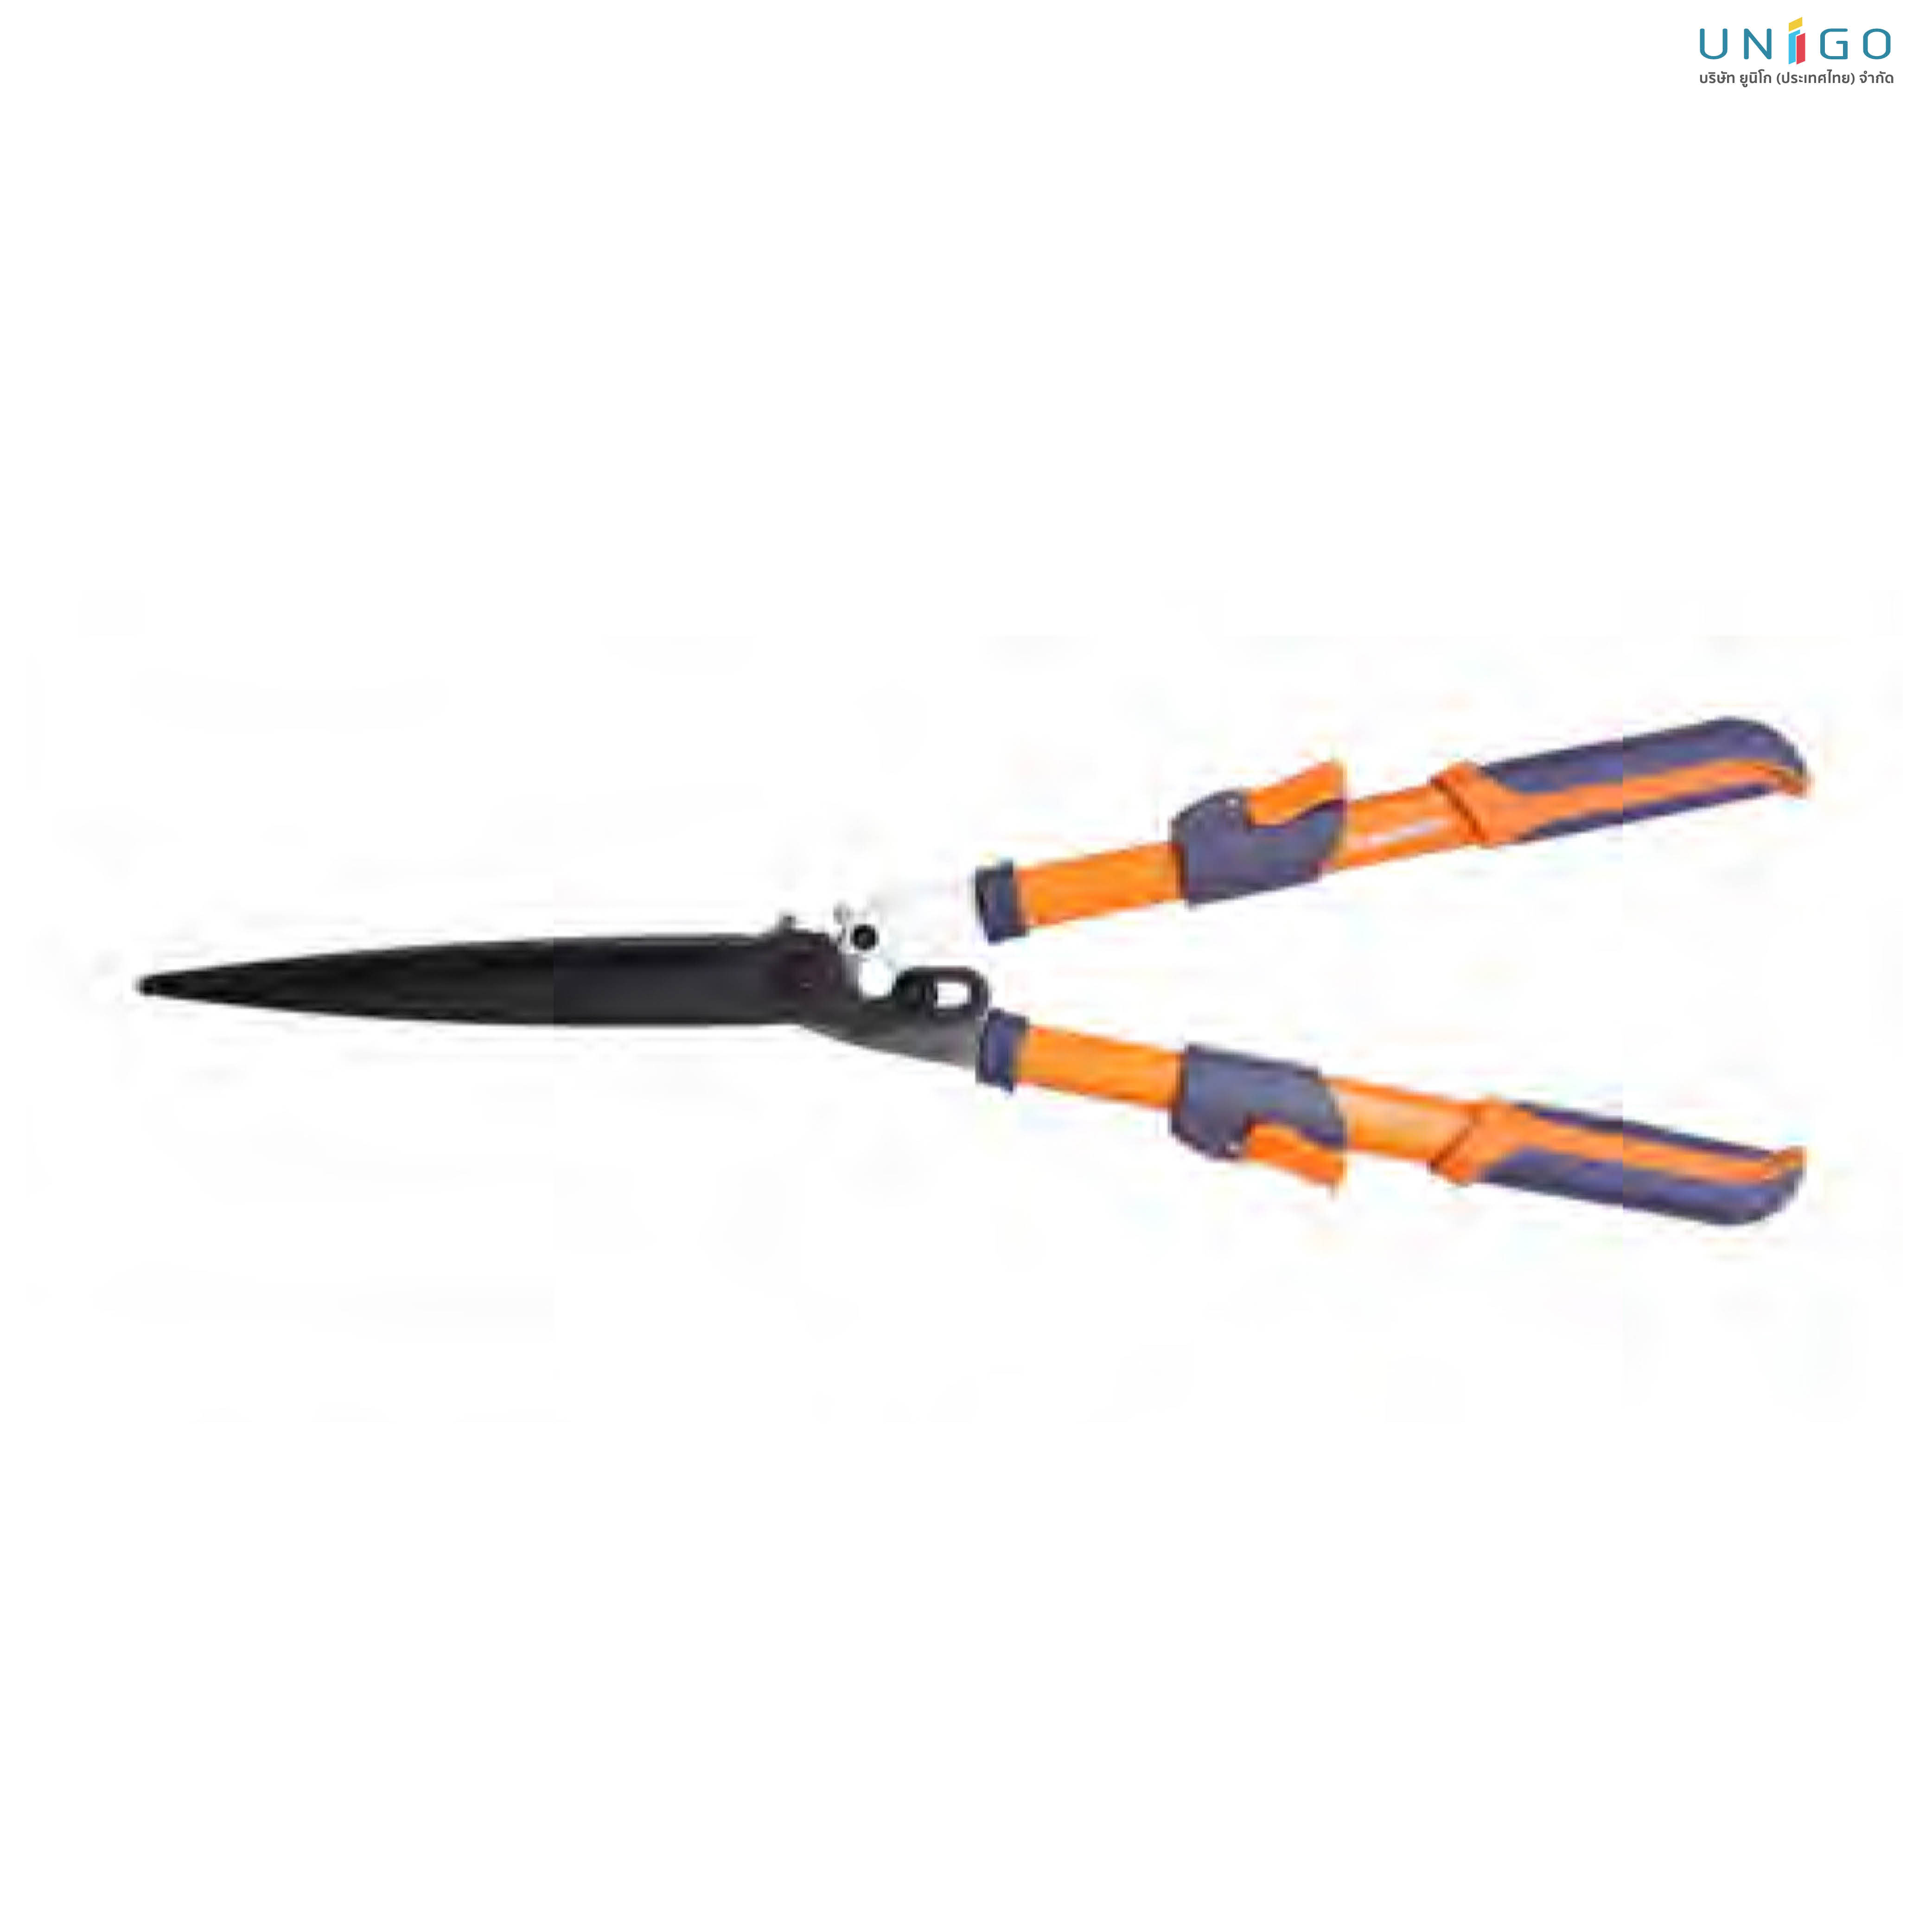 TELESCOPIC STRAIGHT BLADE GEAR ACTION  HEDGE SHEARS